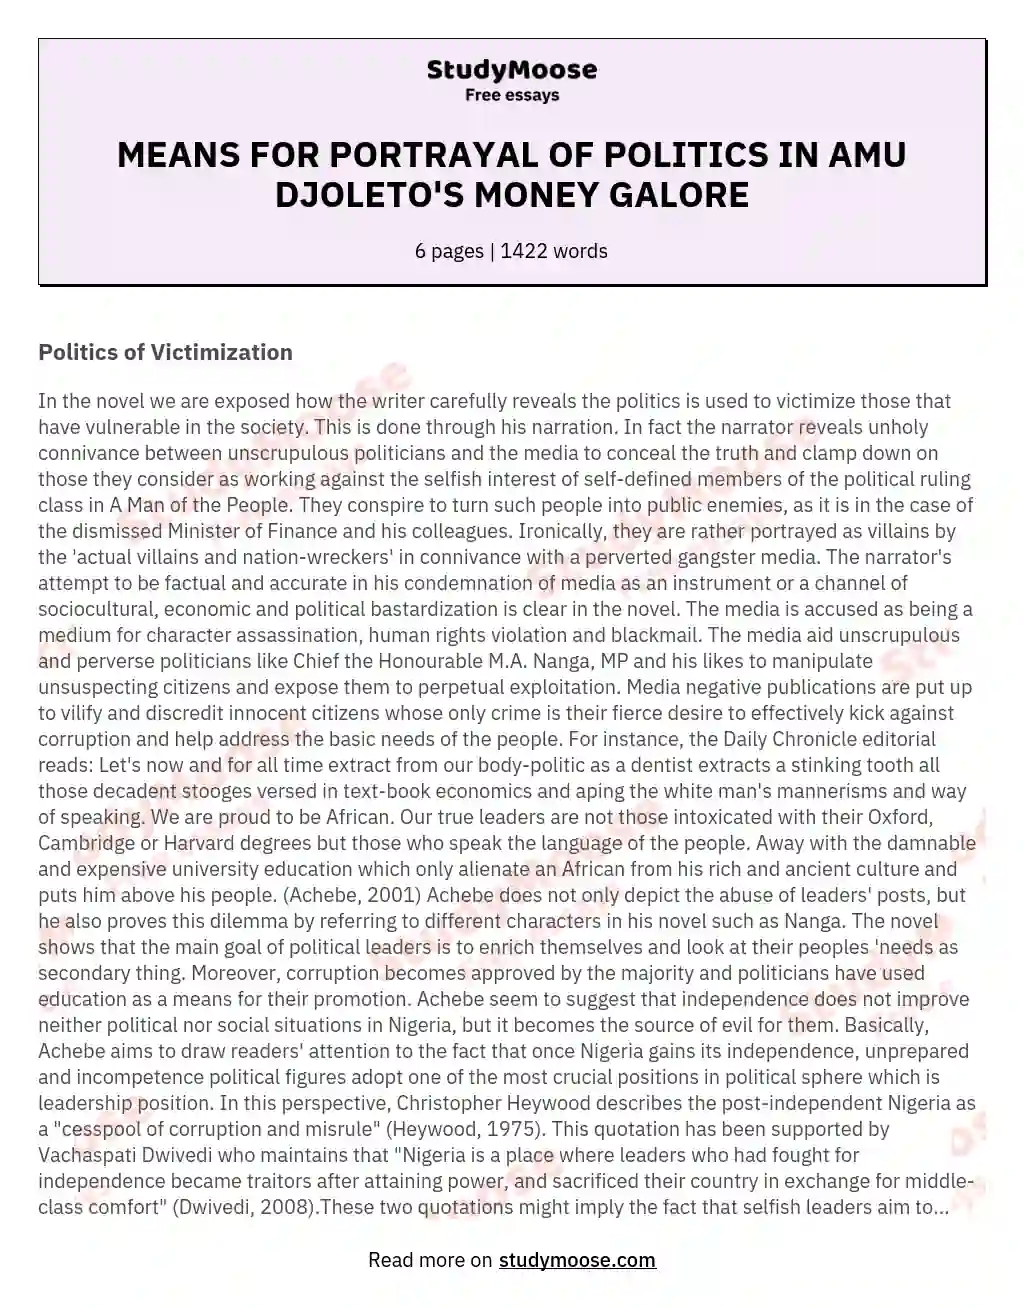 MEANS FOR PORTRAYAL OF POLITICS IN AMU DJOLETO'S MONEY GALORE essay